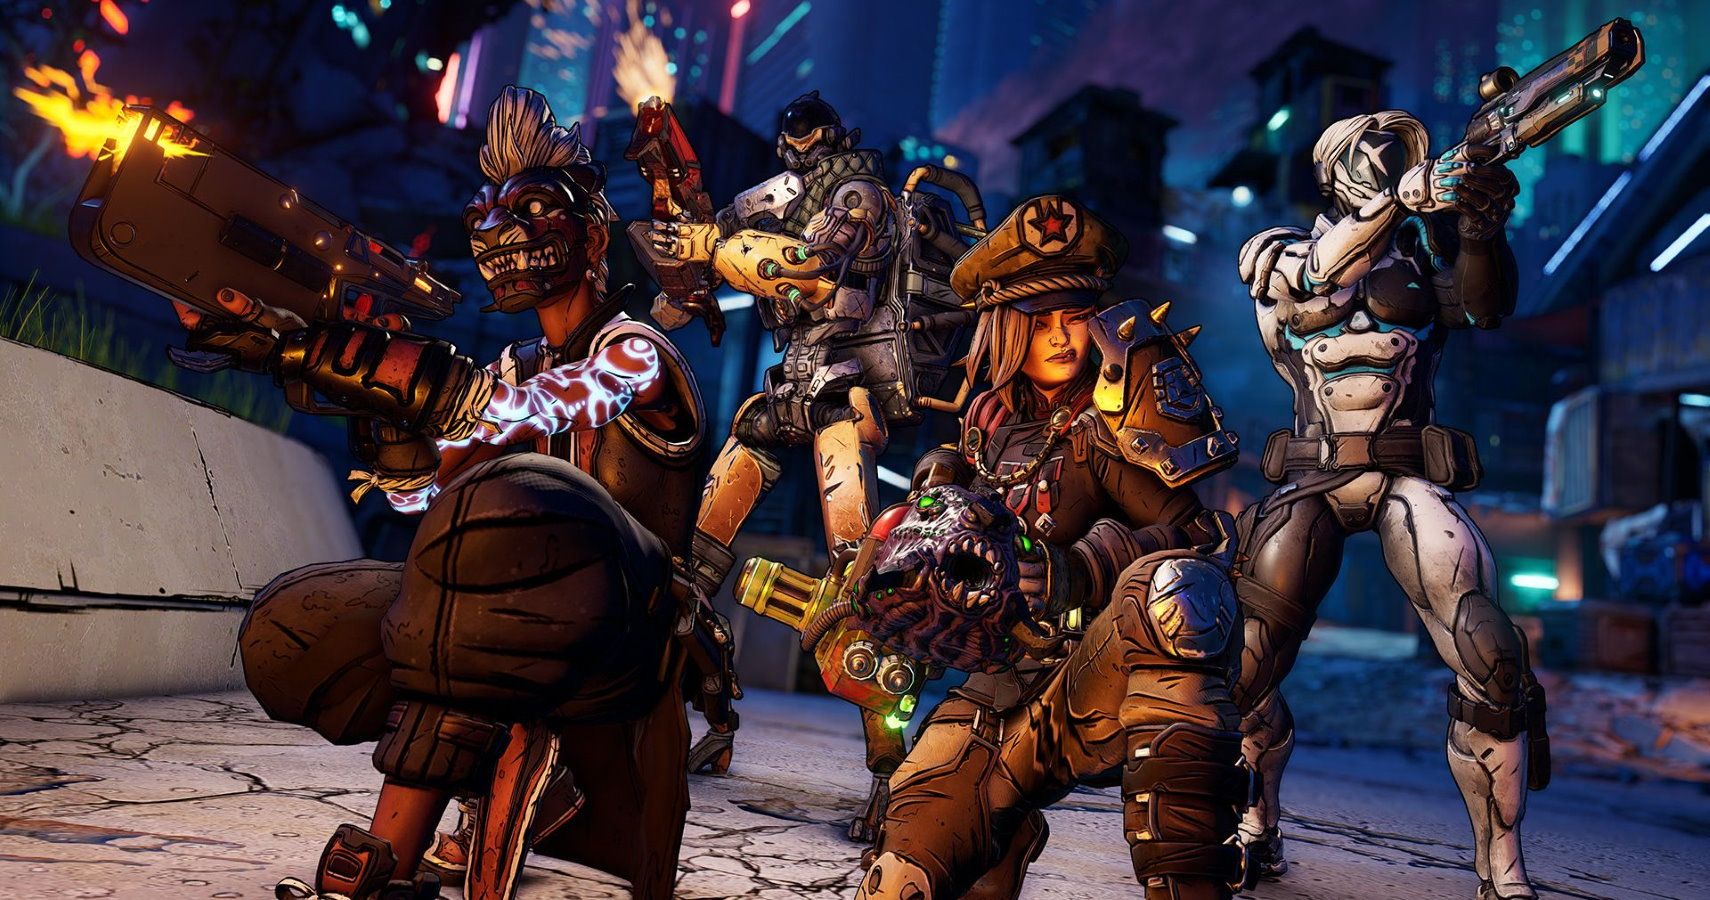 Borderlands 3 Runs At 120fps In Performance Mode On PS5 And Xbox Series X